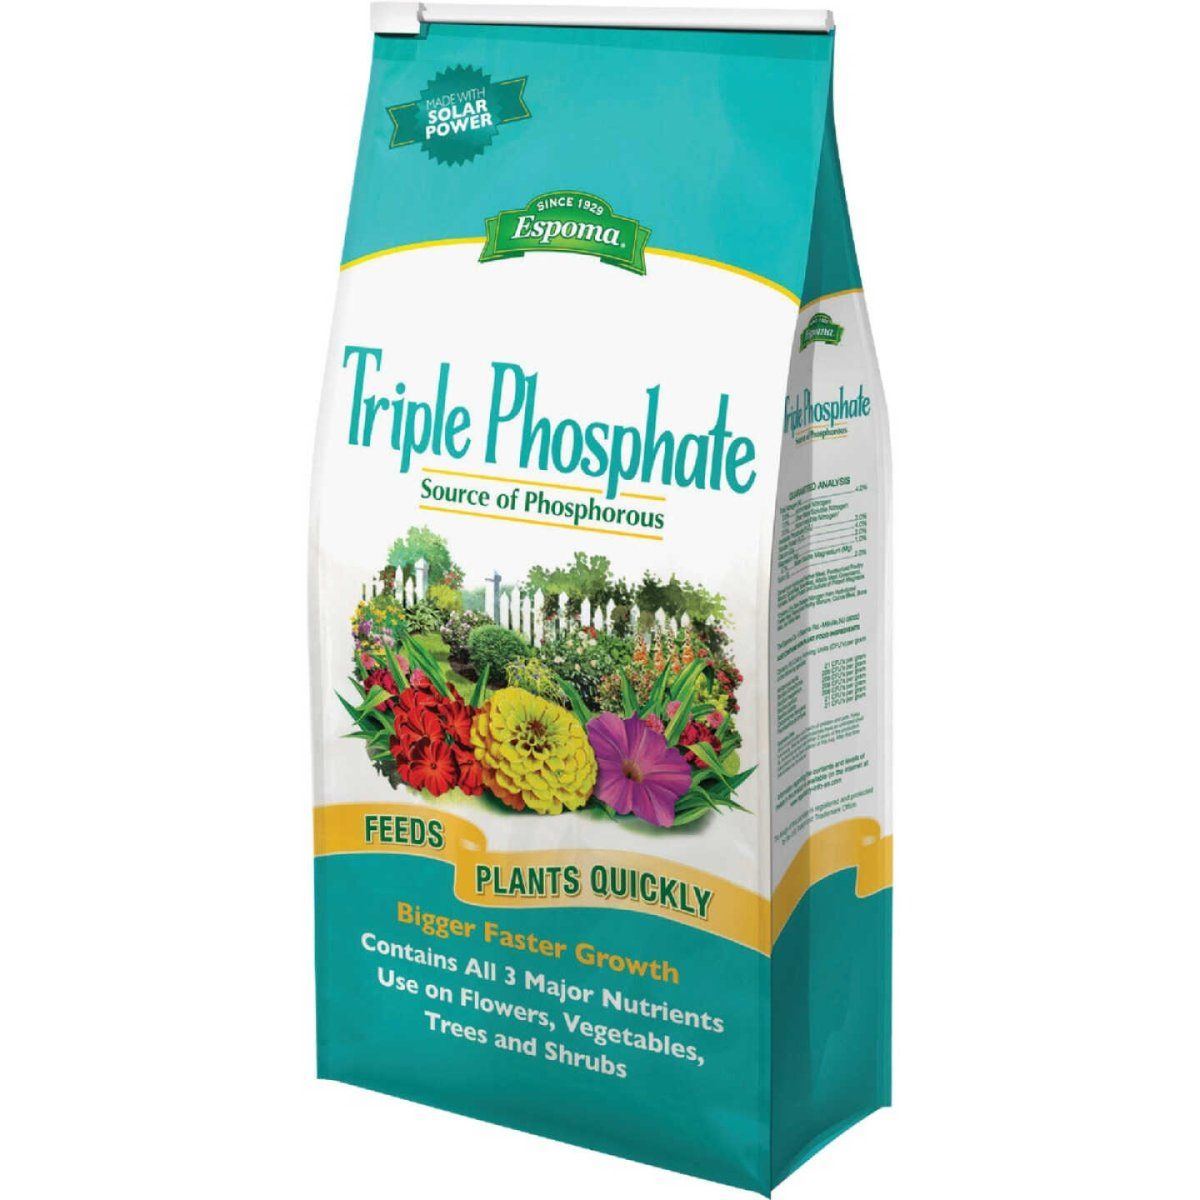 Anyone using triple phosphate for bloom boosters